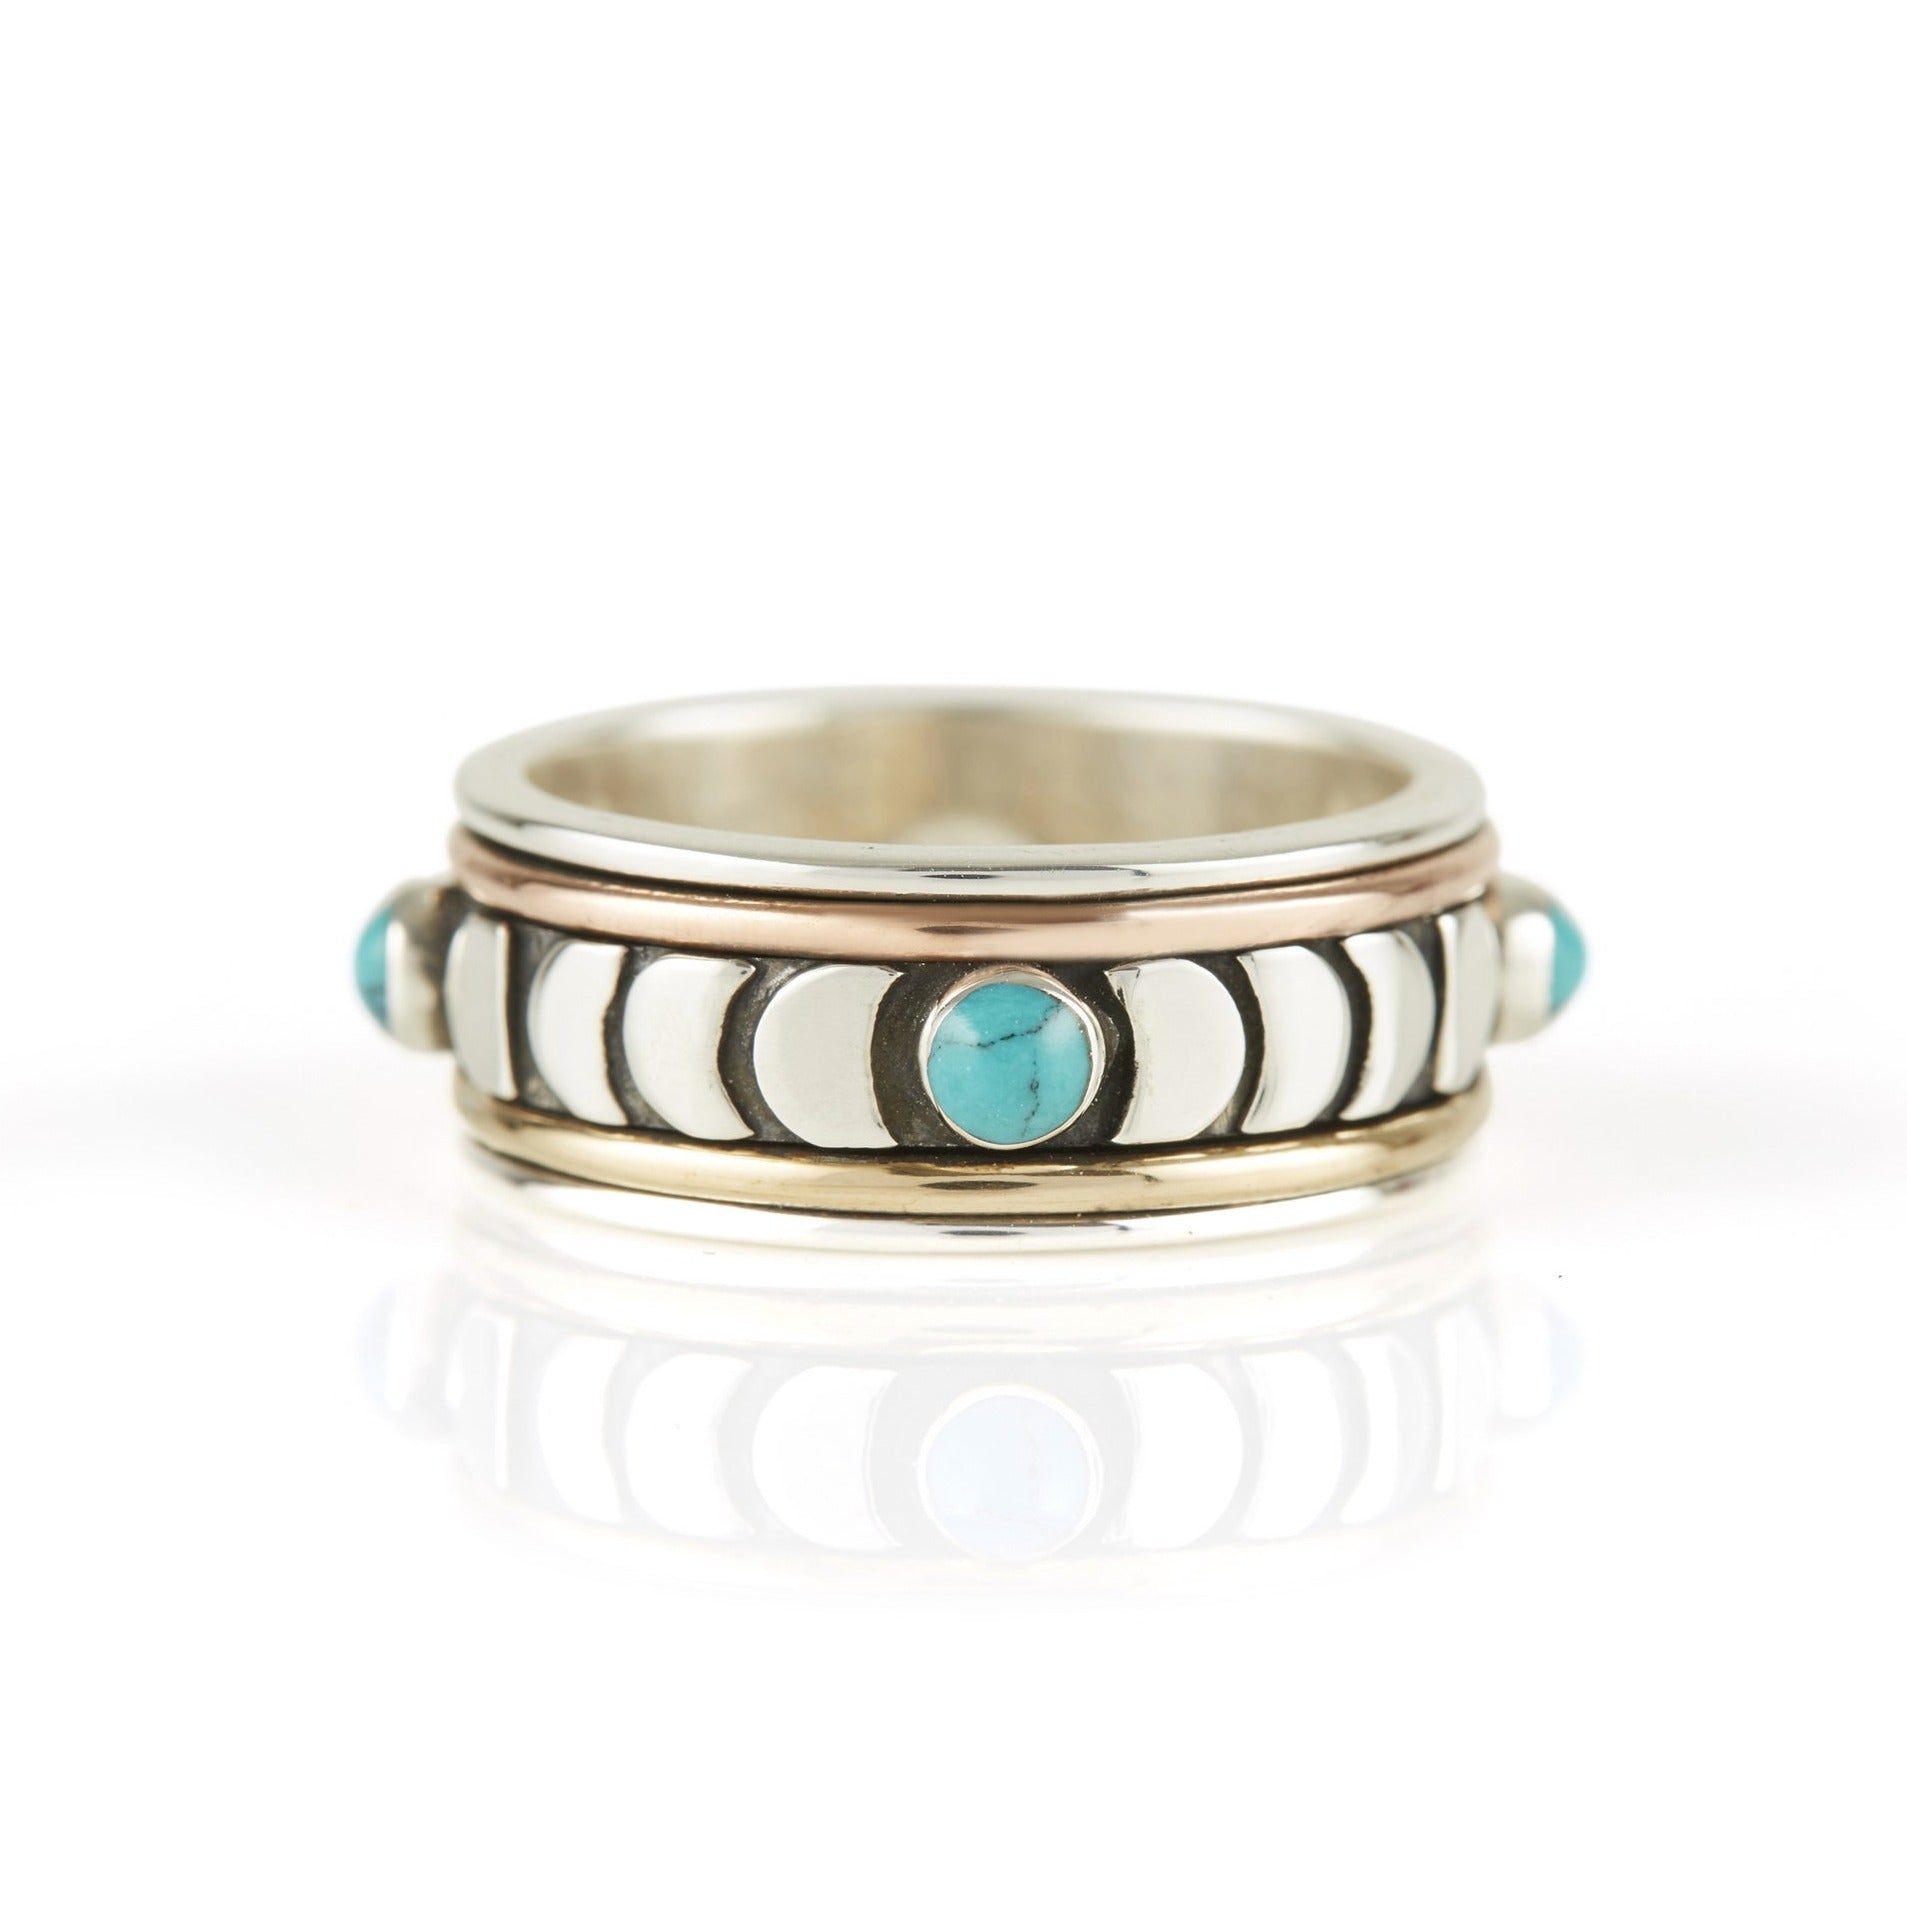 TURQUOISE MOON PHASE SPINNING RING